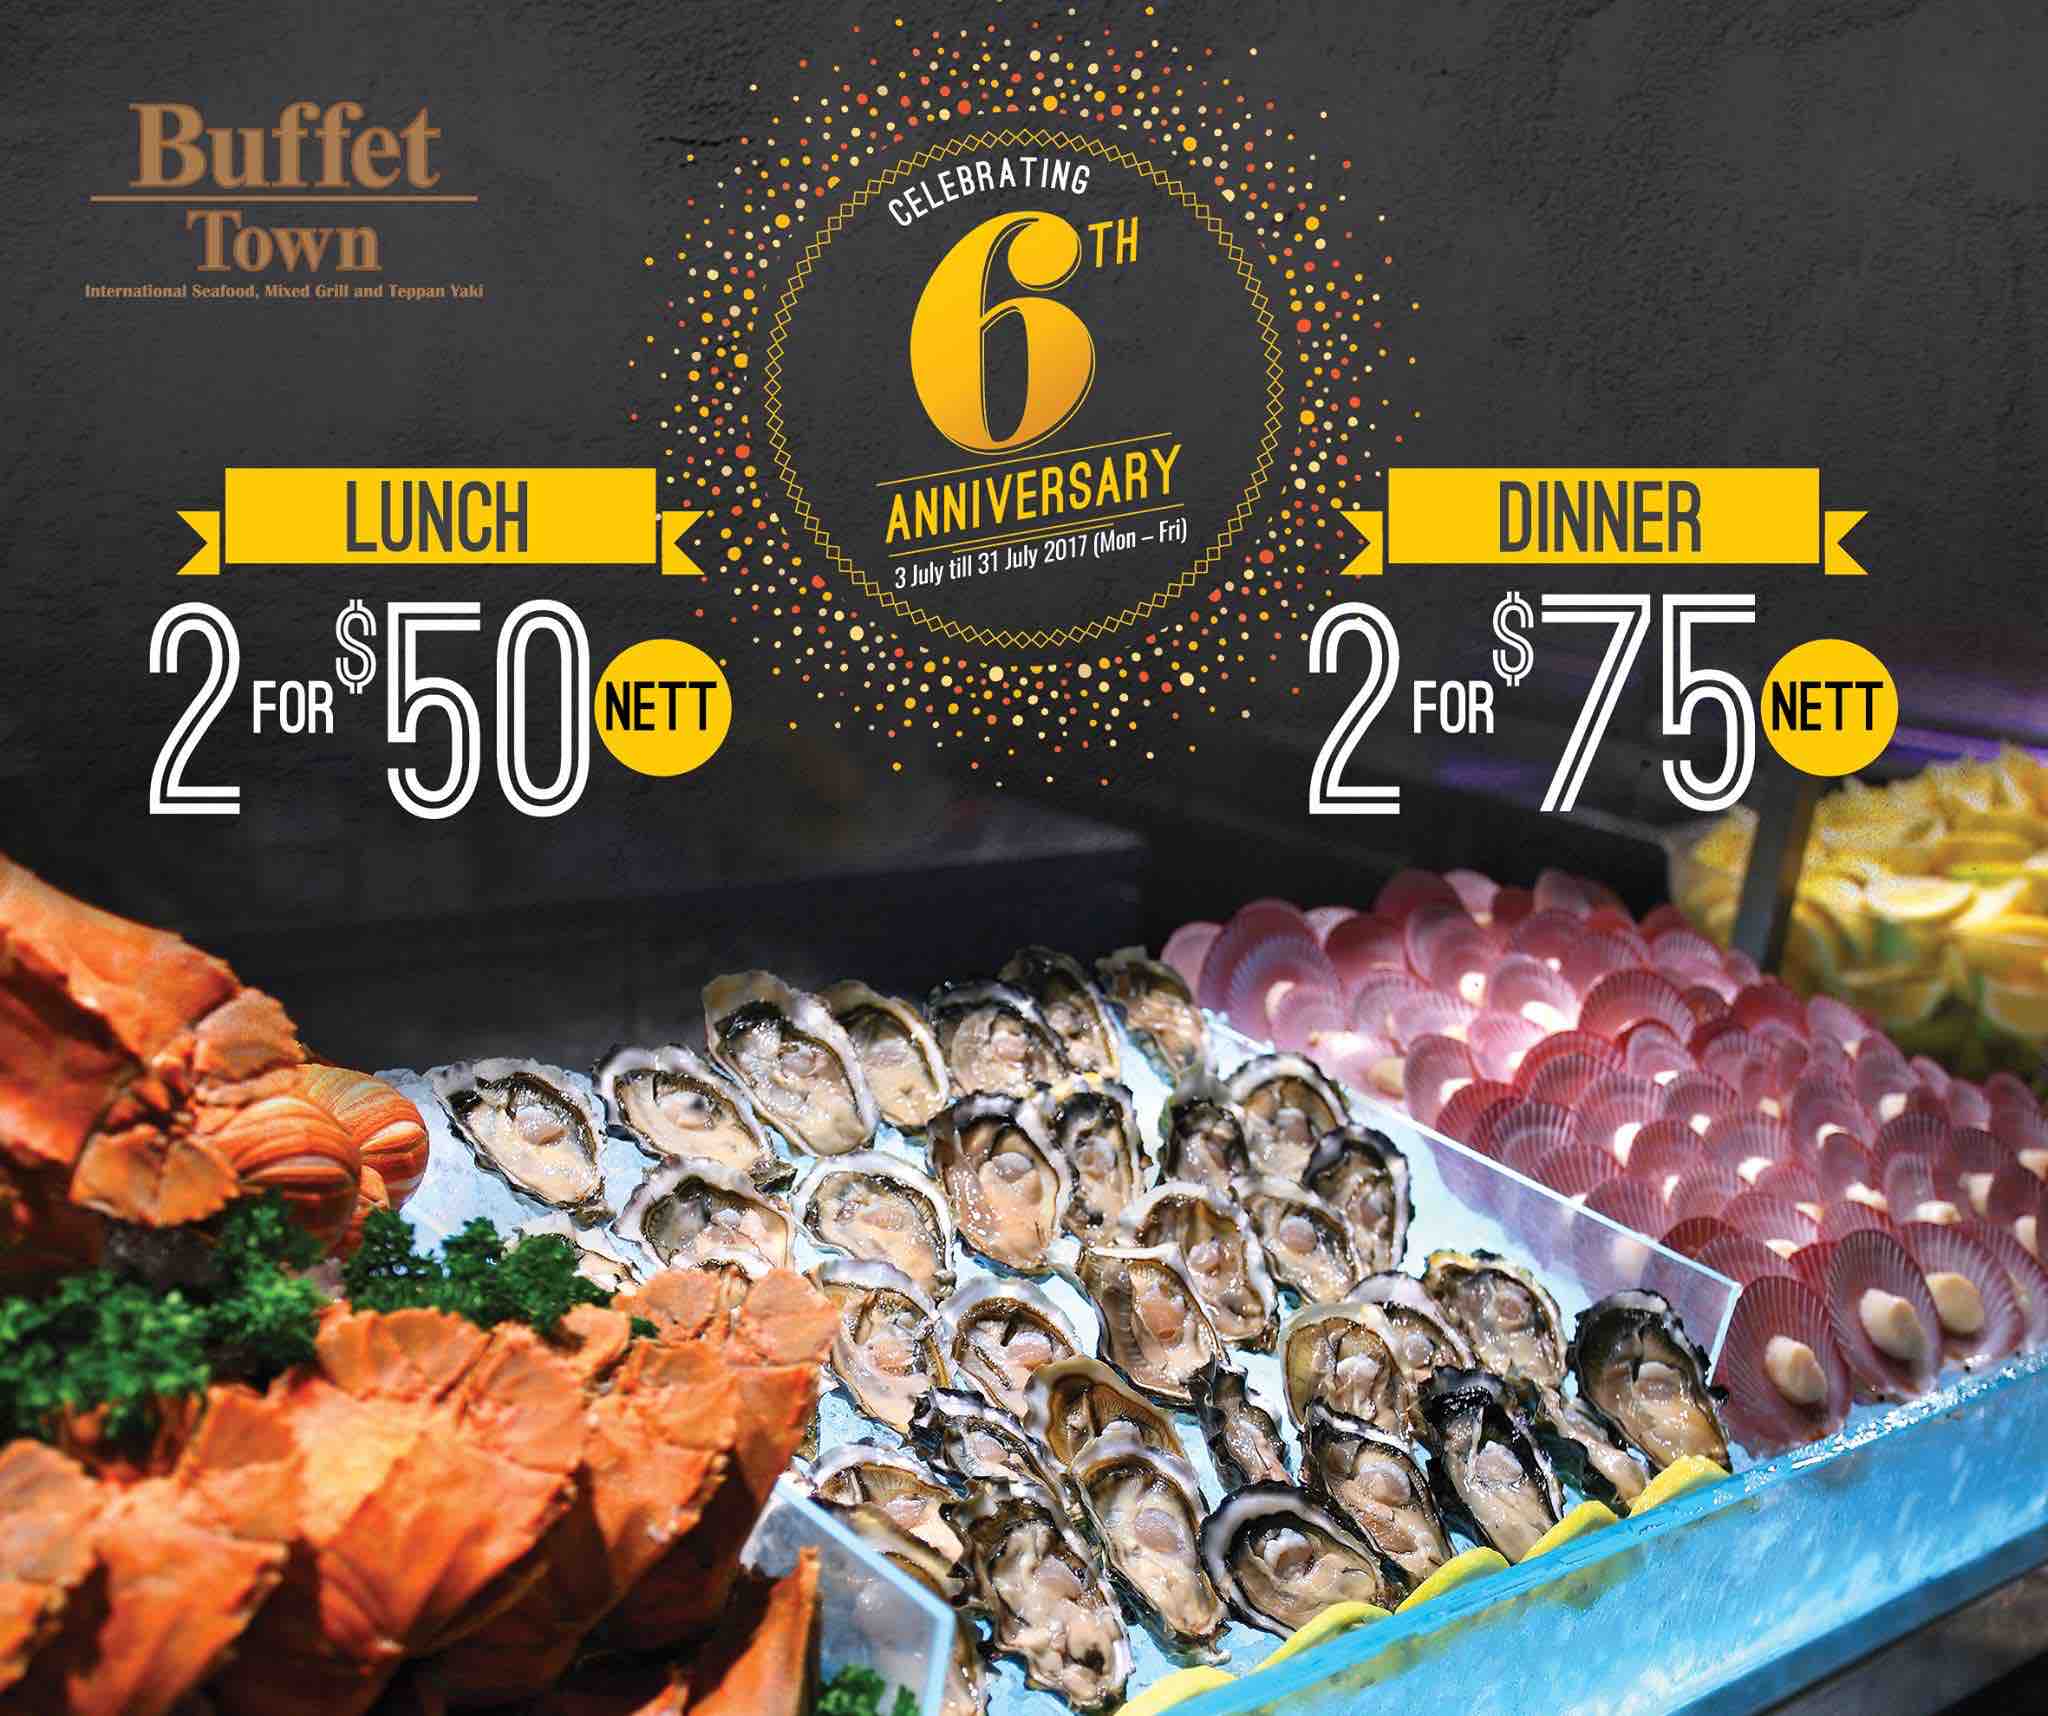 Buffet Town Singapore 6th Anniversary Lunch & Dinner Promotion 3-31 Jul